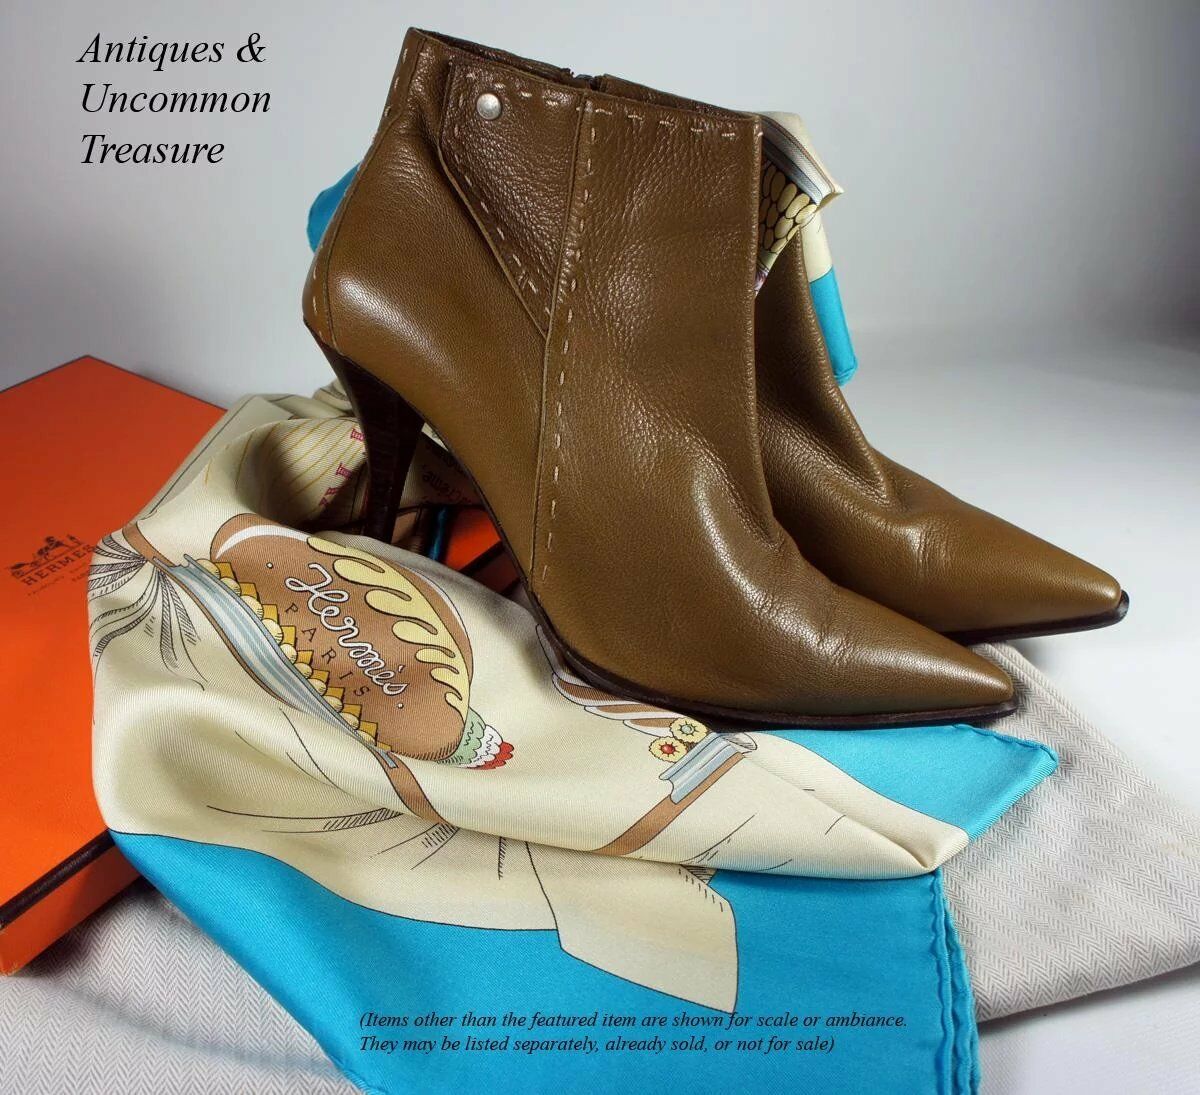 Elegant HERMES Ankle Boots, Booties, in Camel Color, Cream Top Stitch, 3" Heel